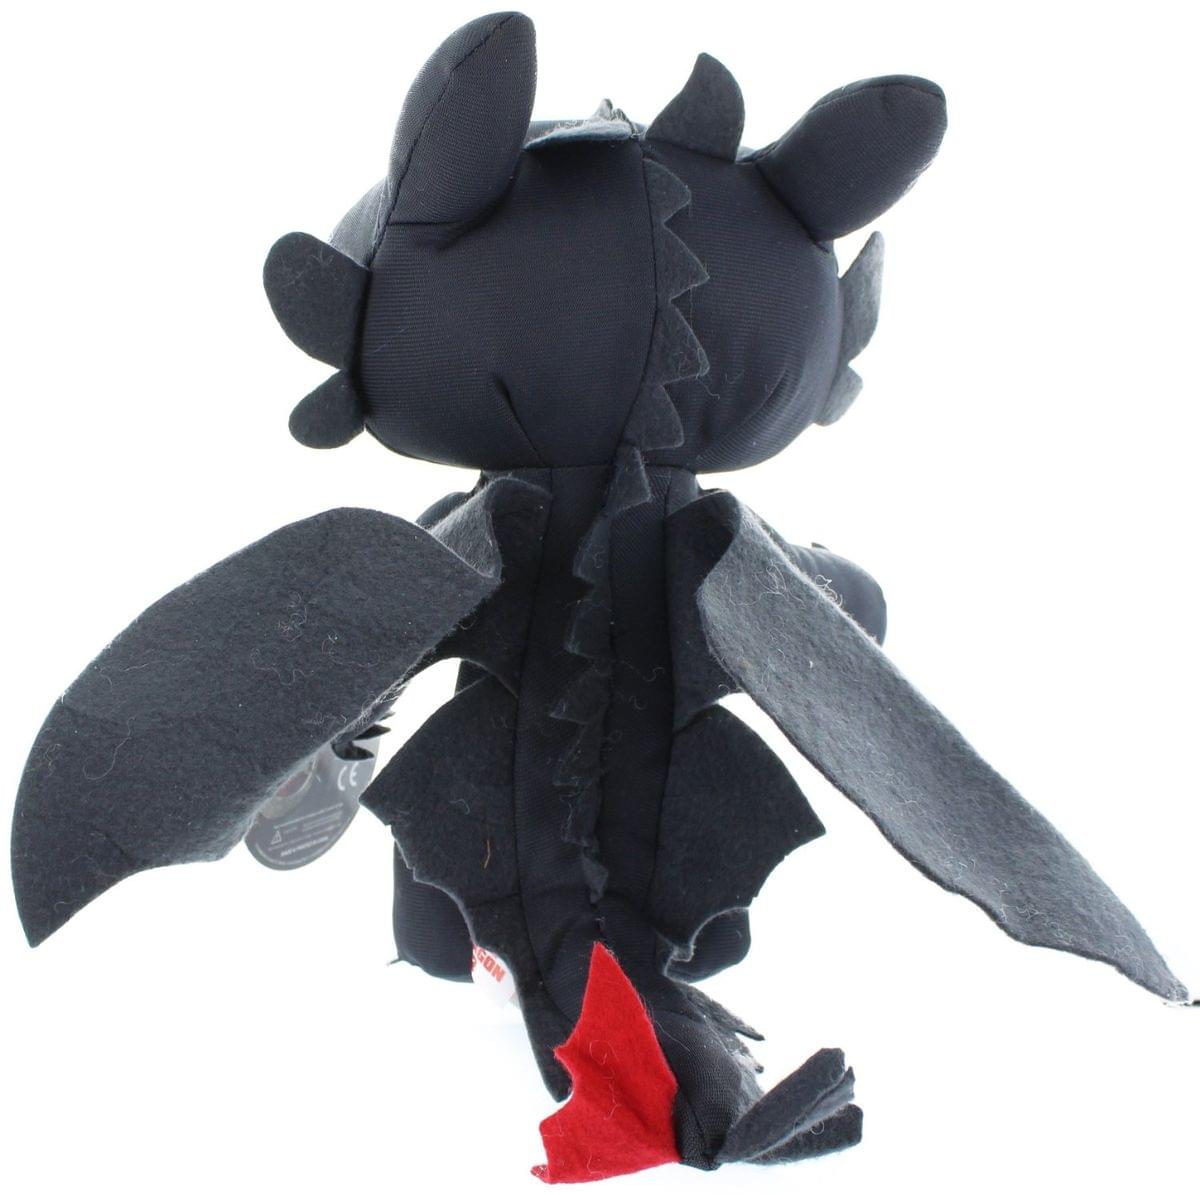 How To Train Your Dragon 2 8" Plush Toothless